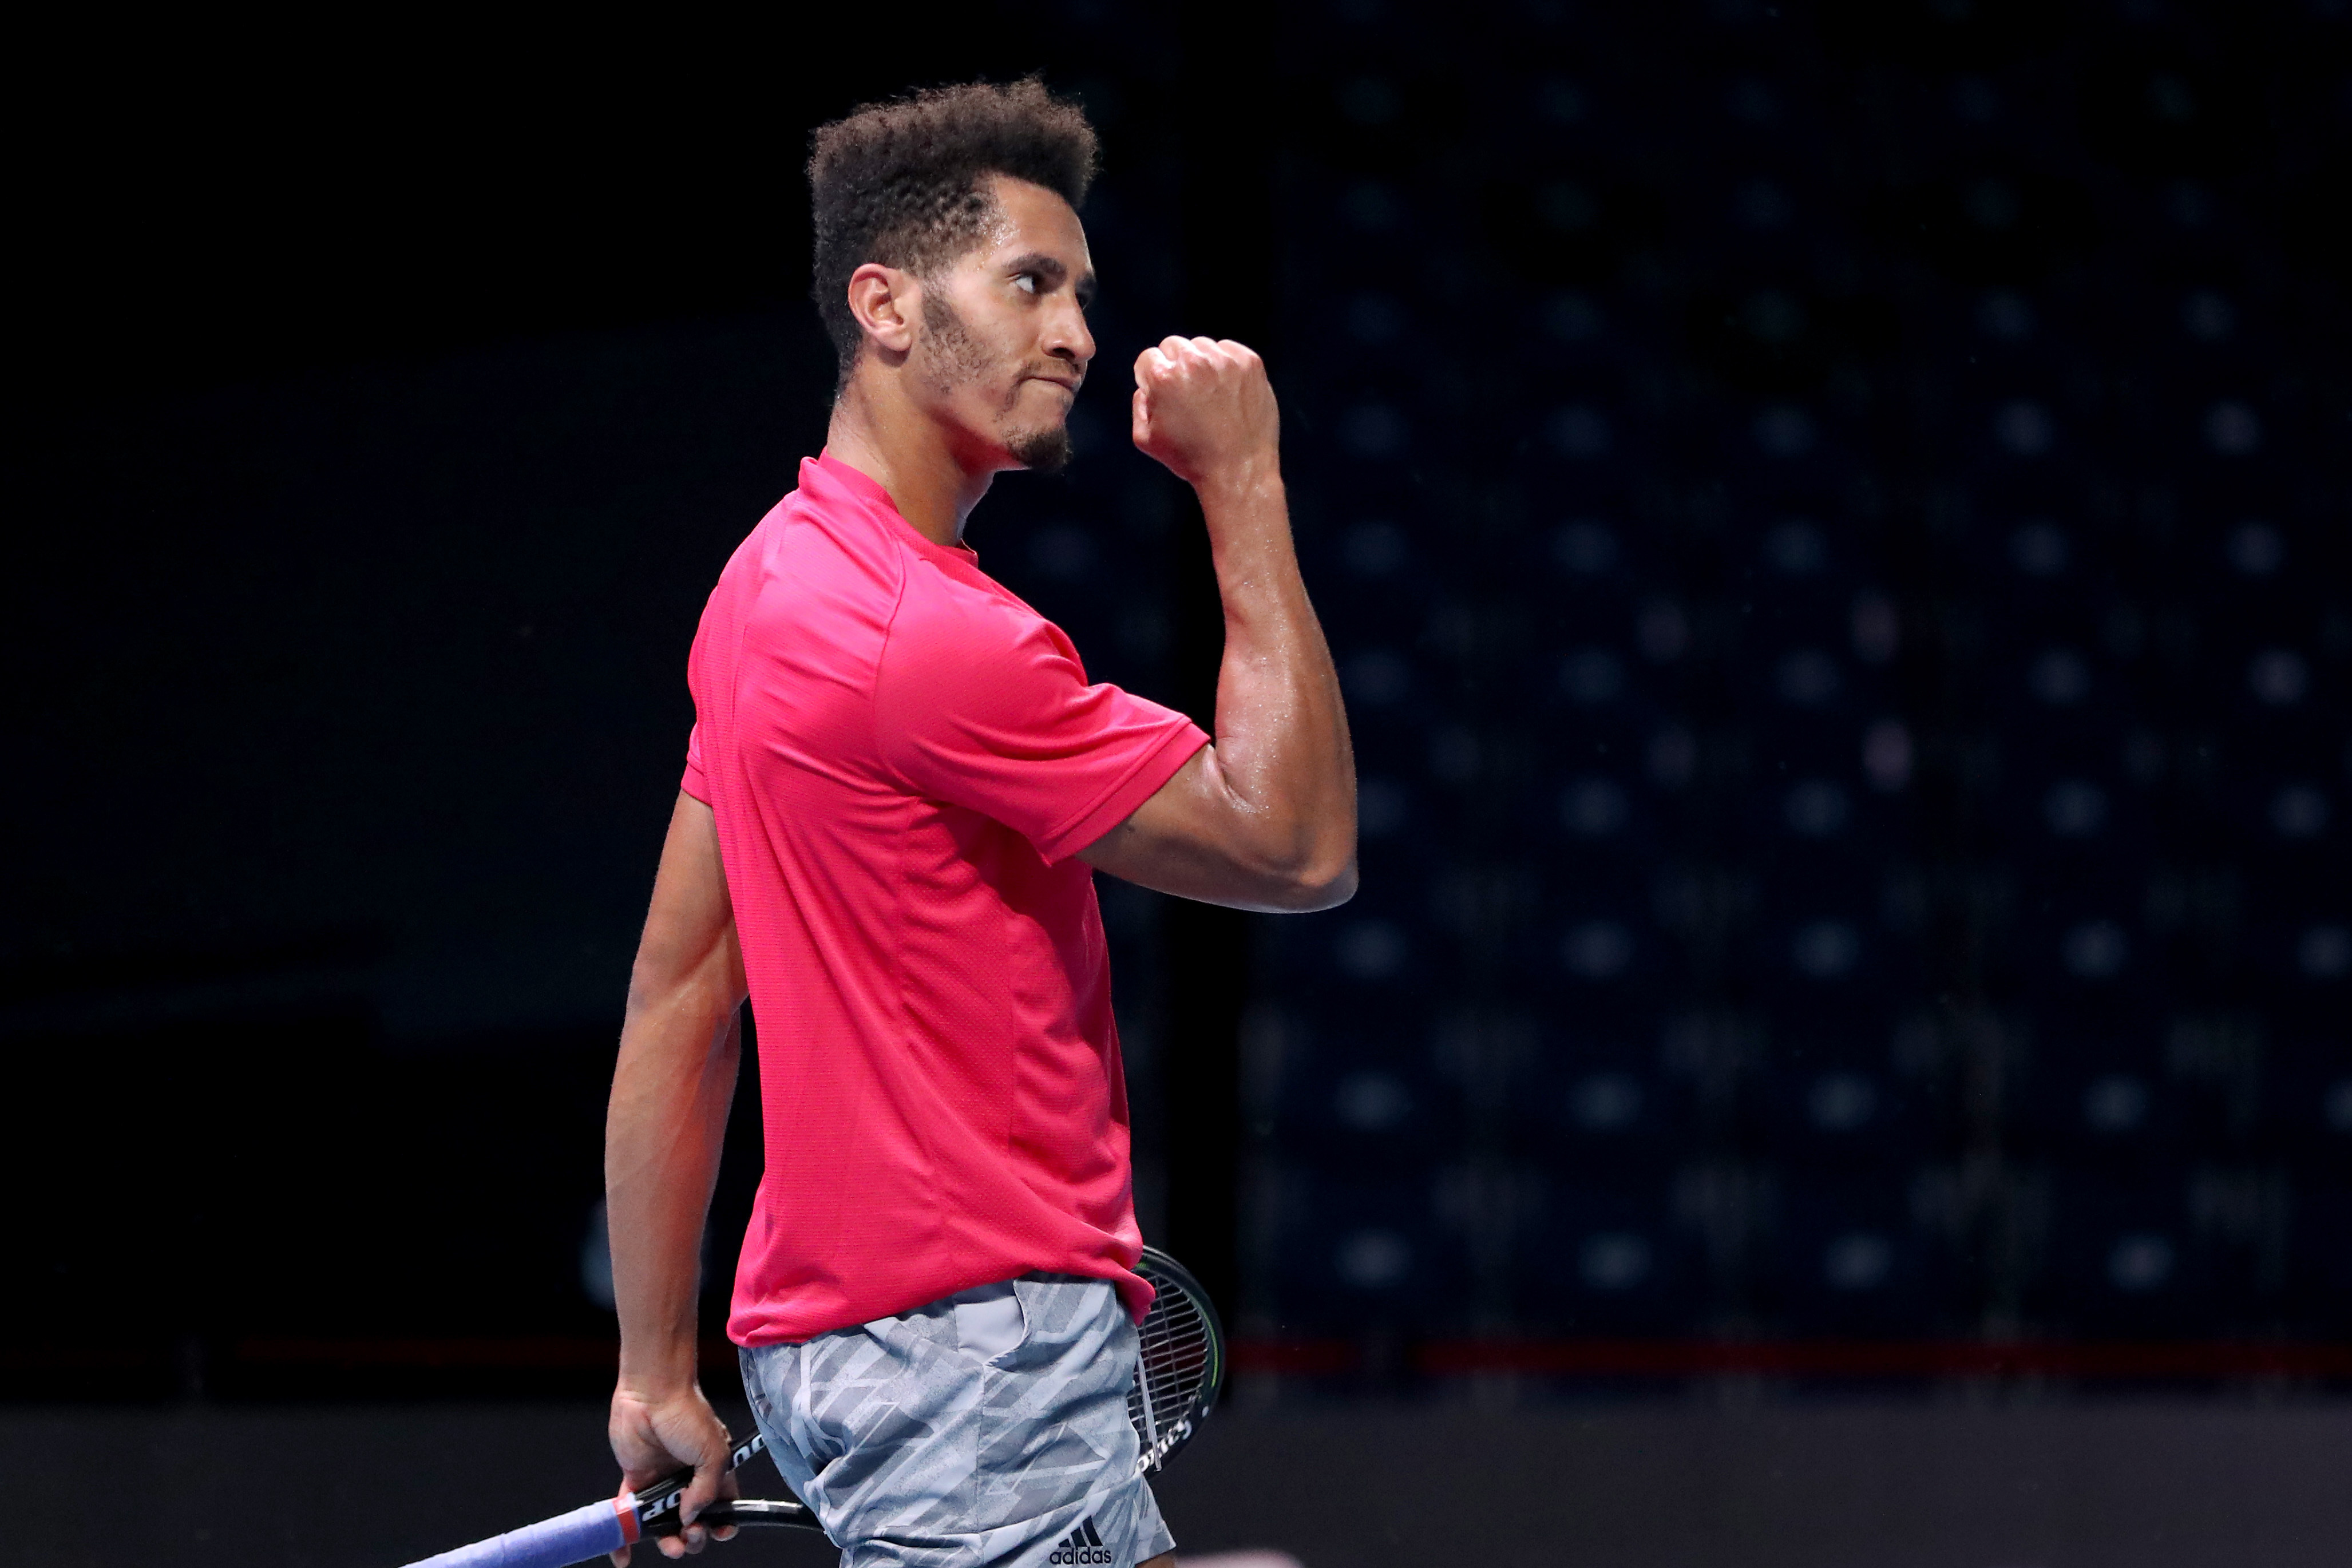 On Miami doubles court, Michael Mmoh channels John Cena